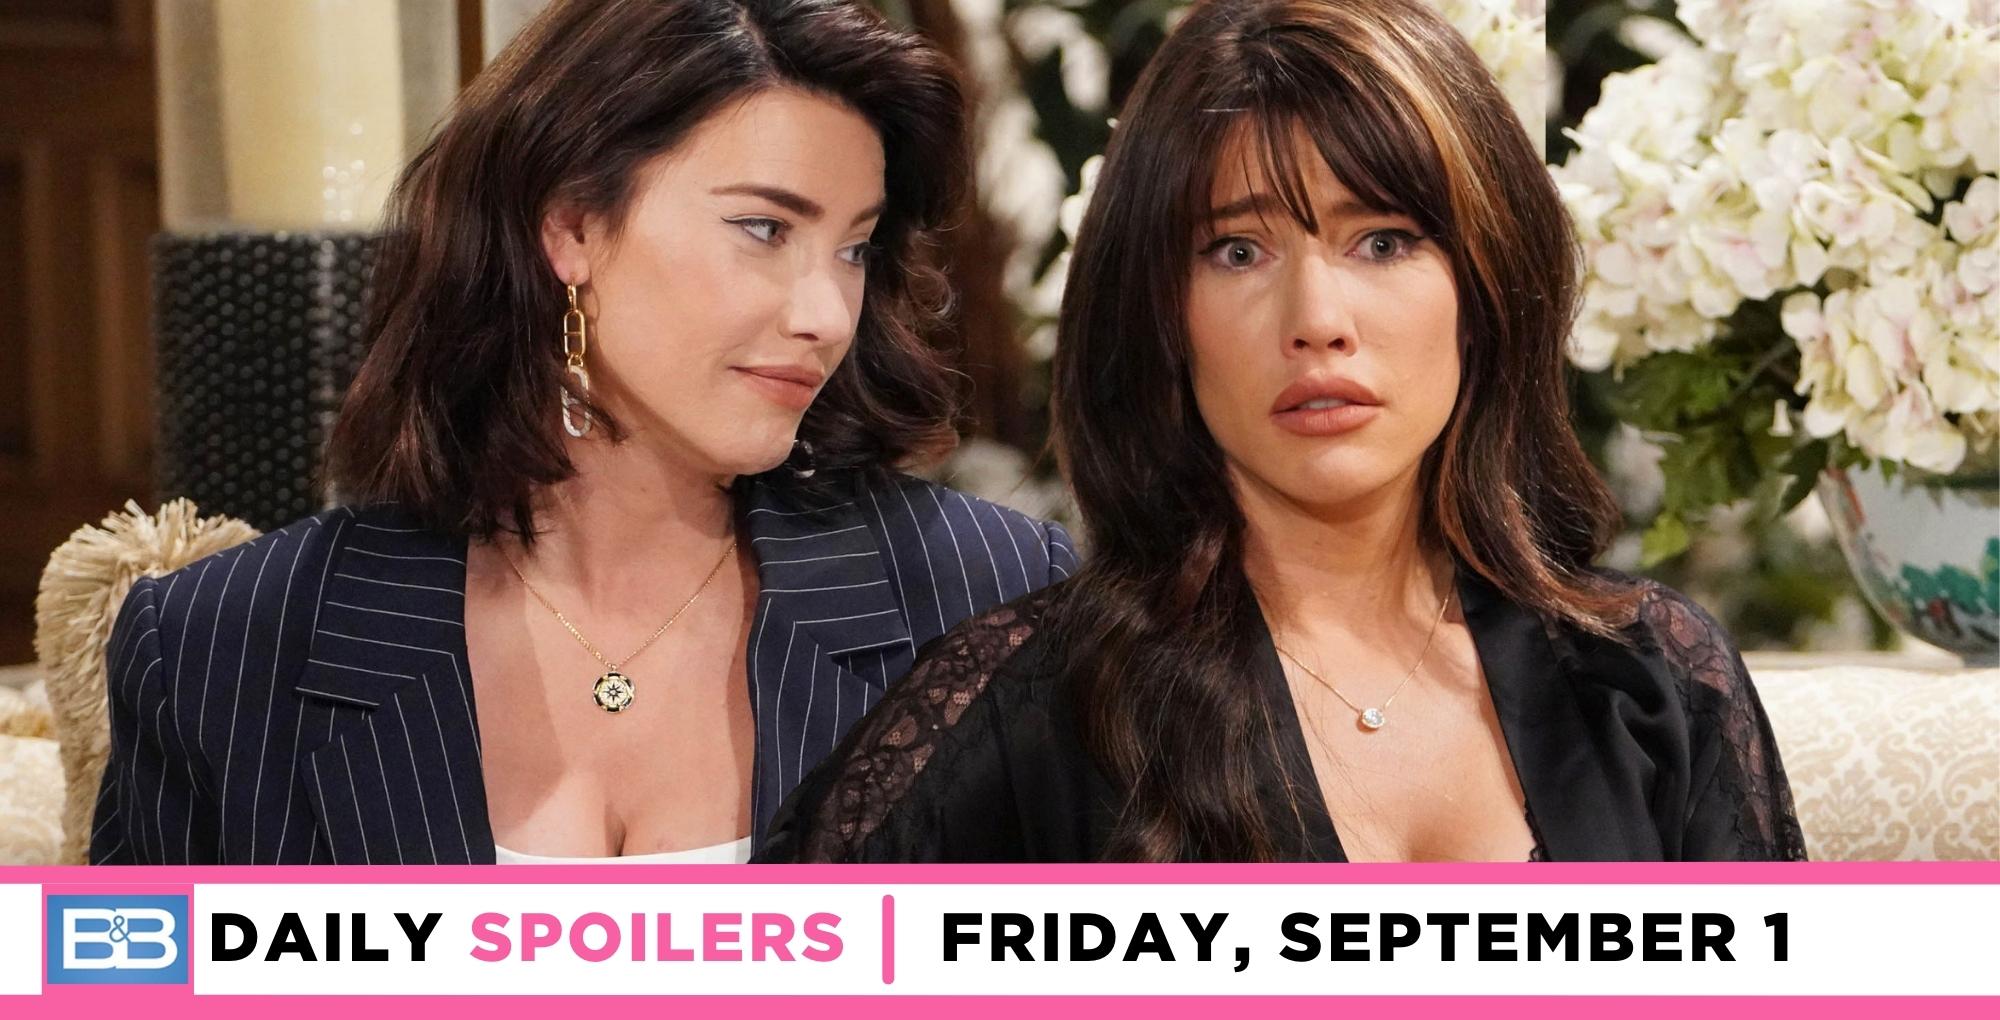 the bold and the beautiful spoilers for september 1, 2023, have two images of steffy.